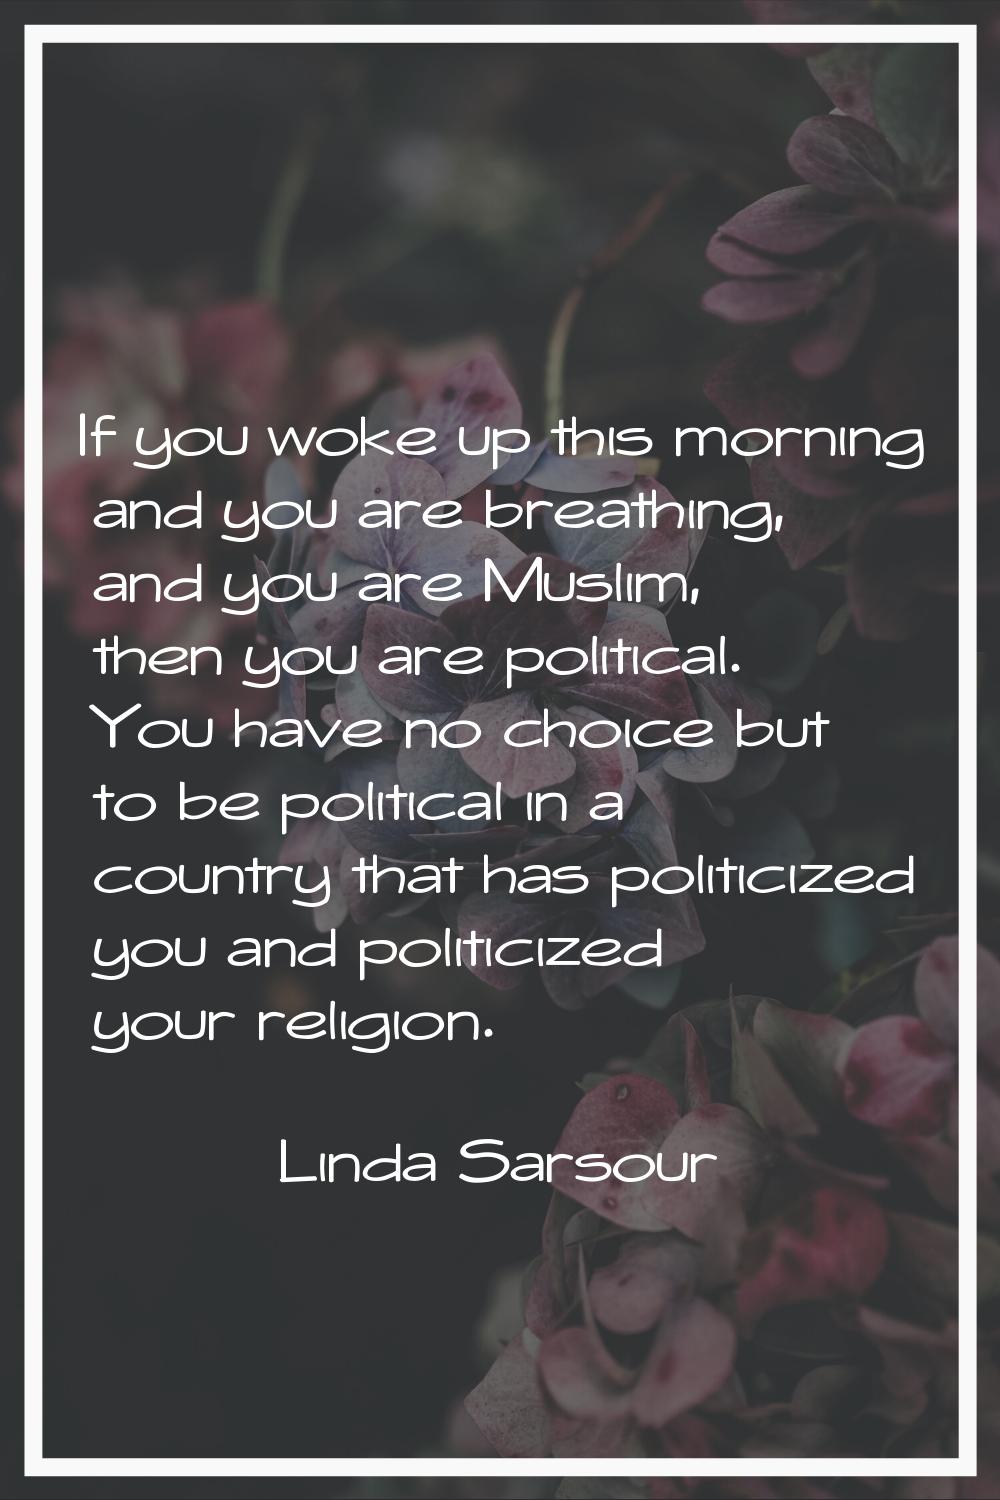 If you woke up this morning and you are breathing, and you are Muslim, then you are political. You 